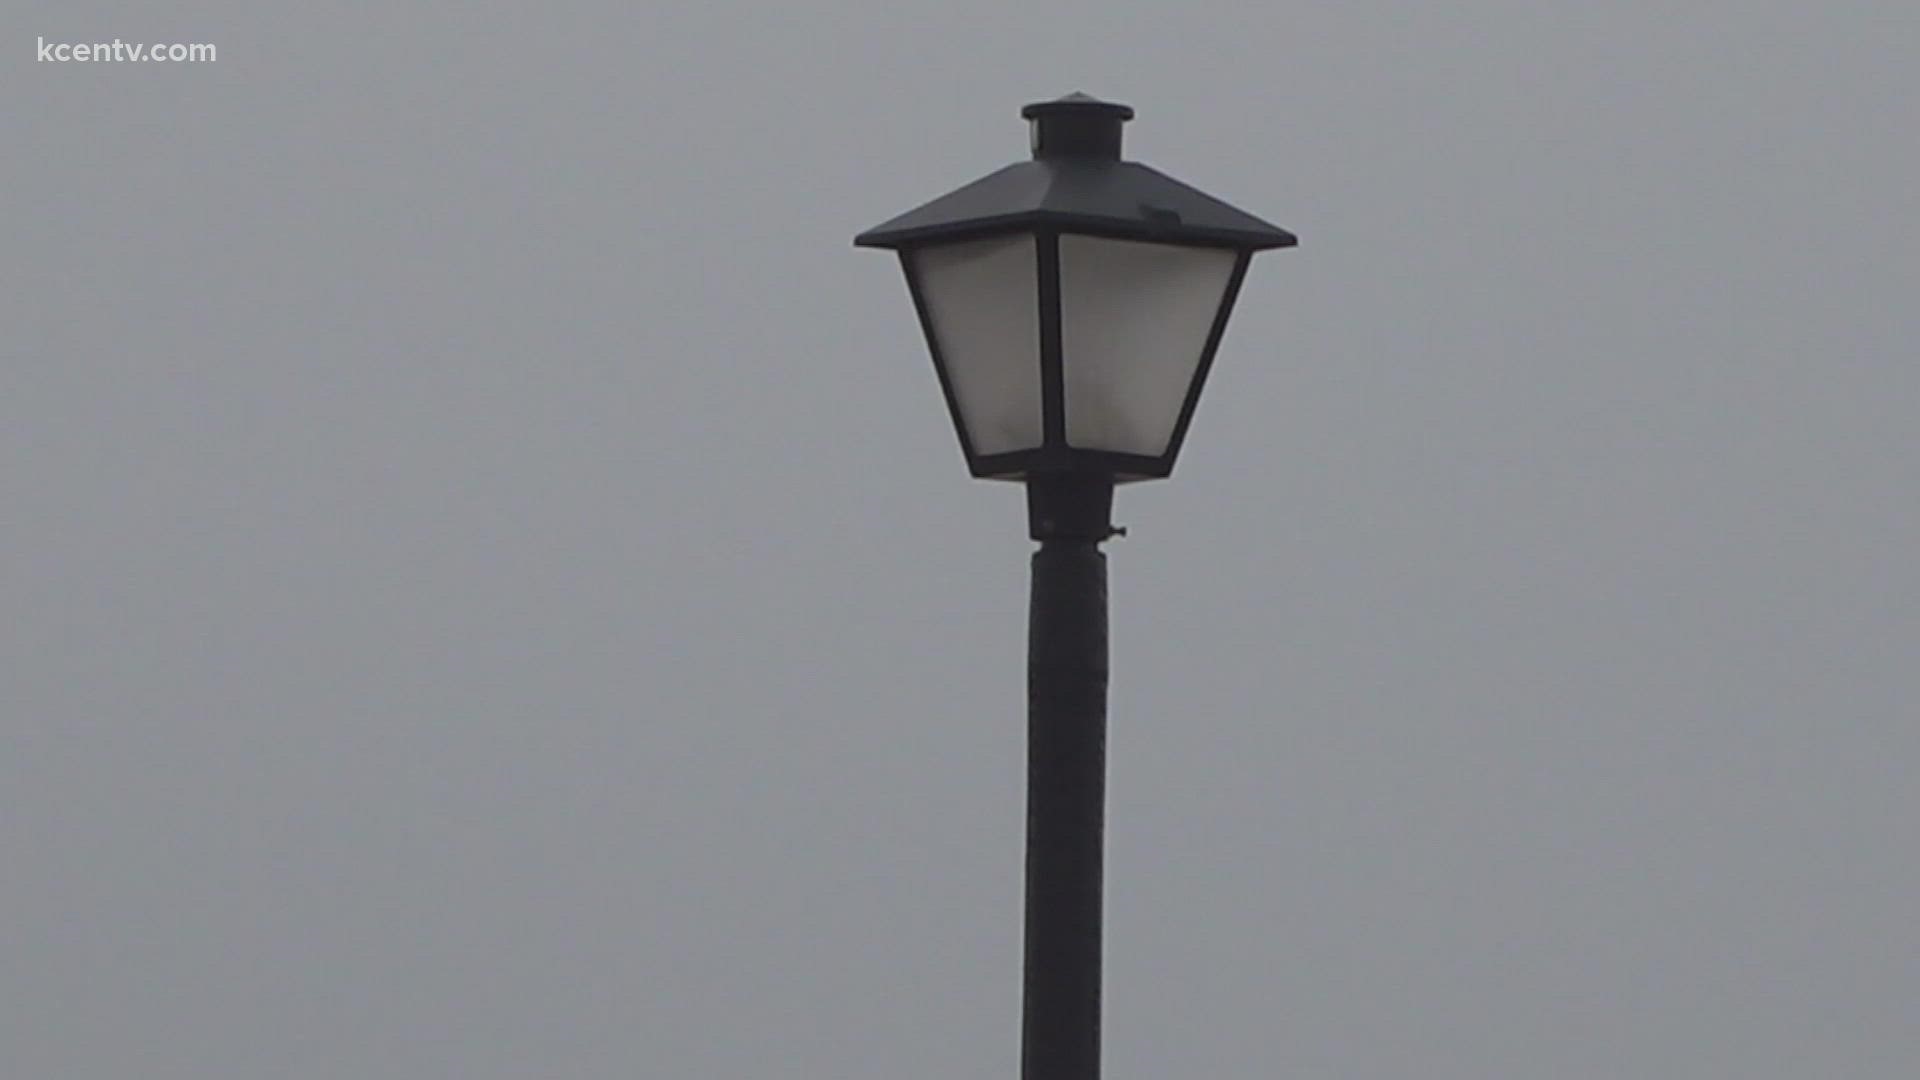 There are 4,539 street lights in the city of Killeen. Mayor Jose Segarra said before the city adds additional street lights, they must own them first.